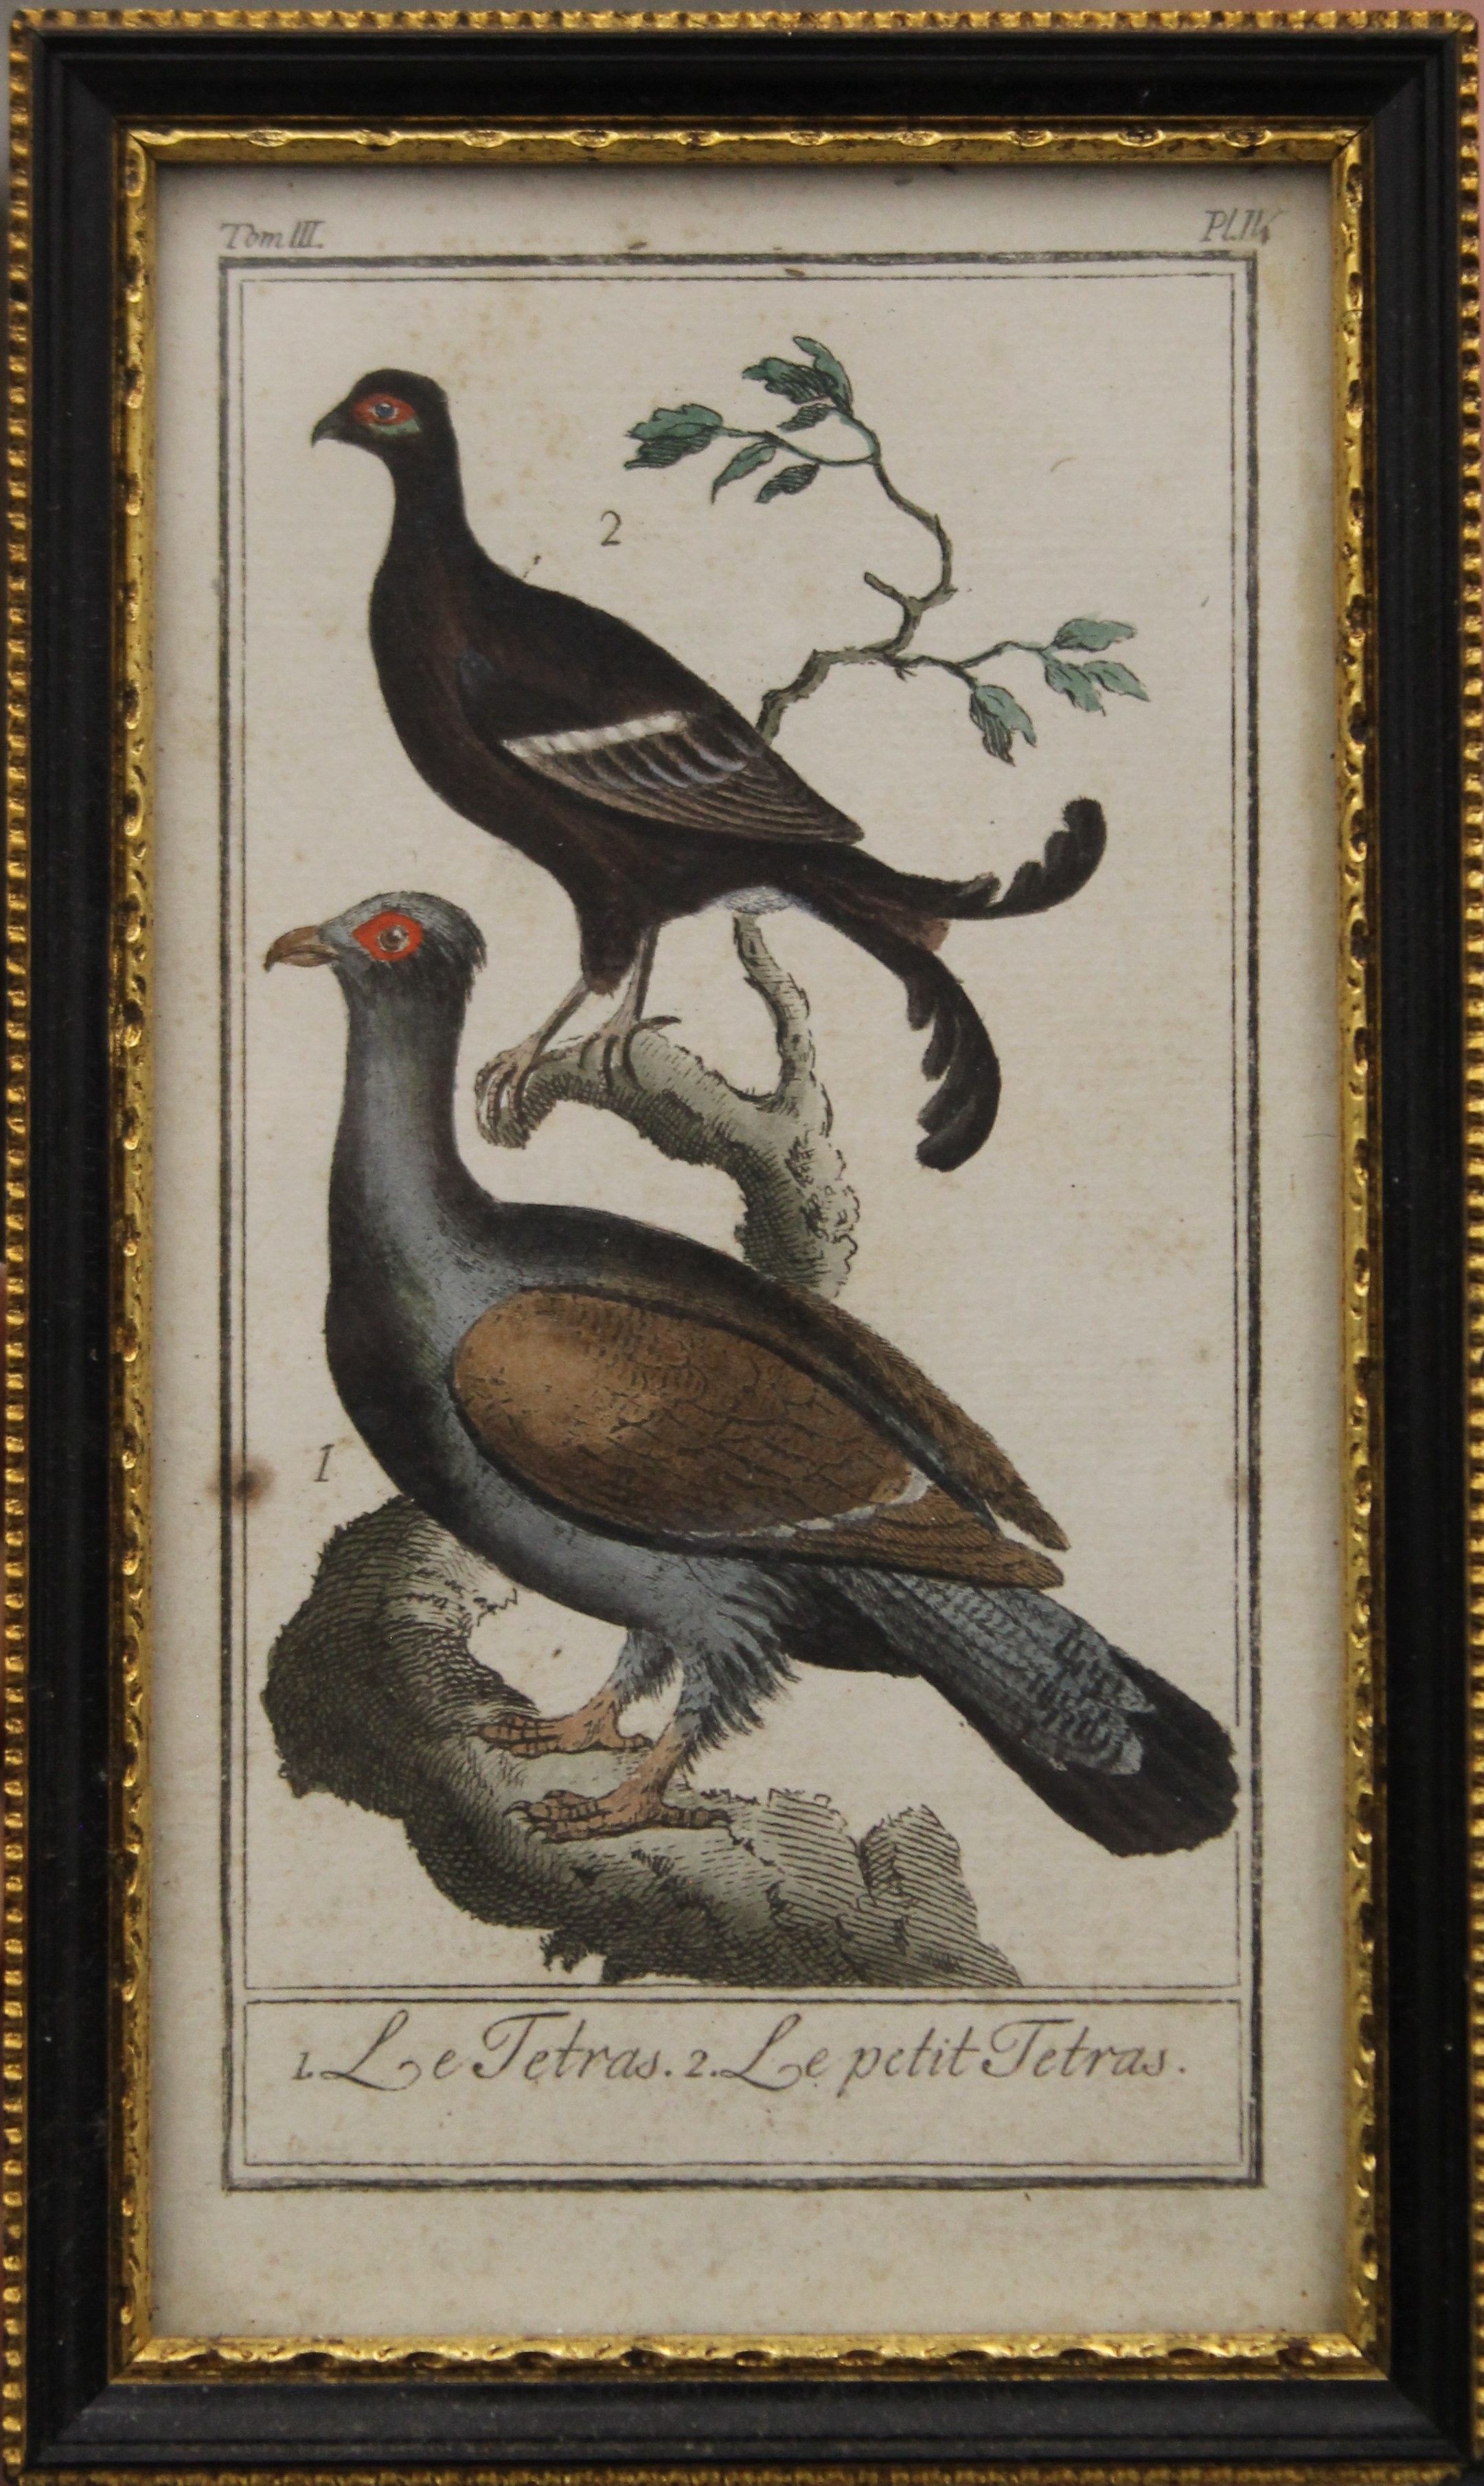 GEORGES-LOUIS LECLERC DE BUFFON (1707-1788), hand coloured engraving from Histoire Naturelle, - Image 2 of 3